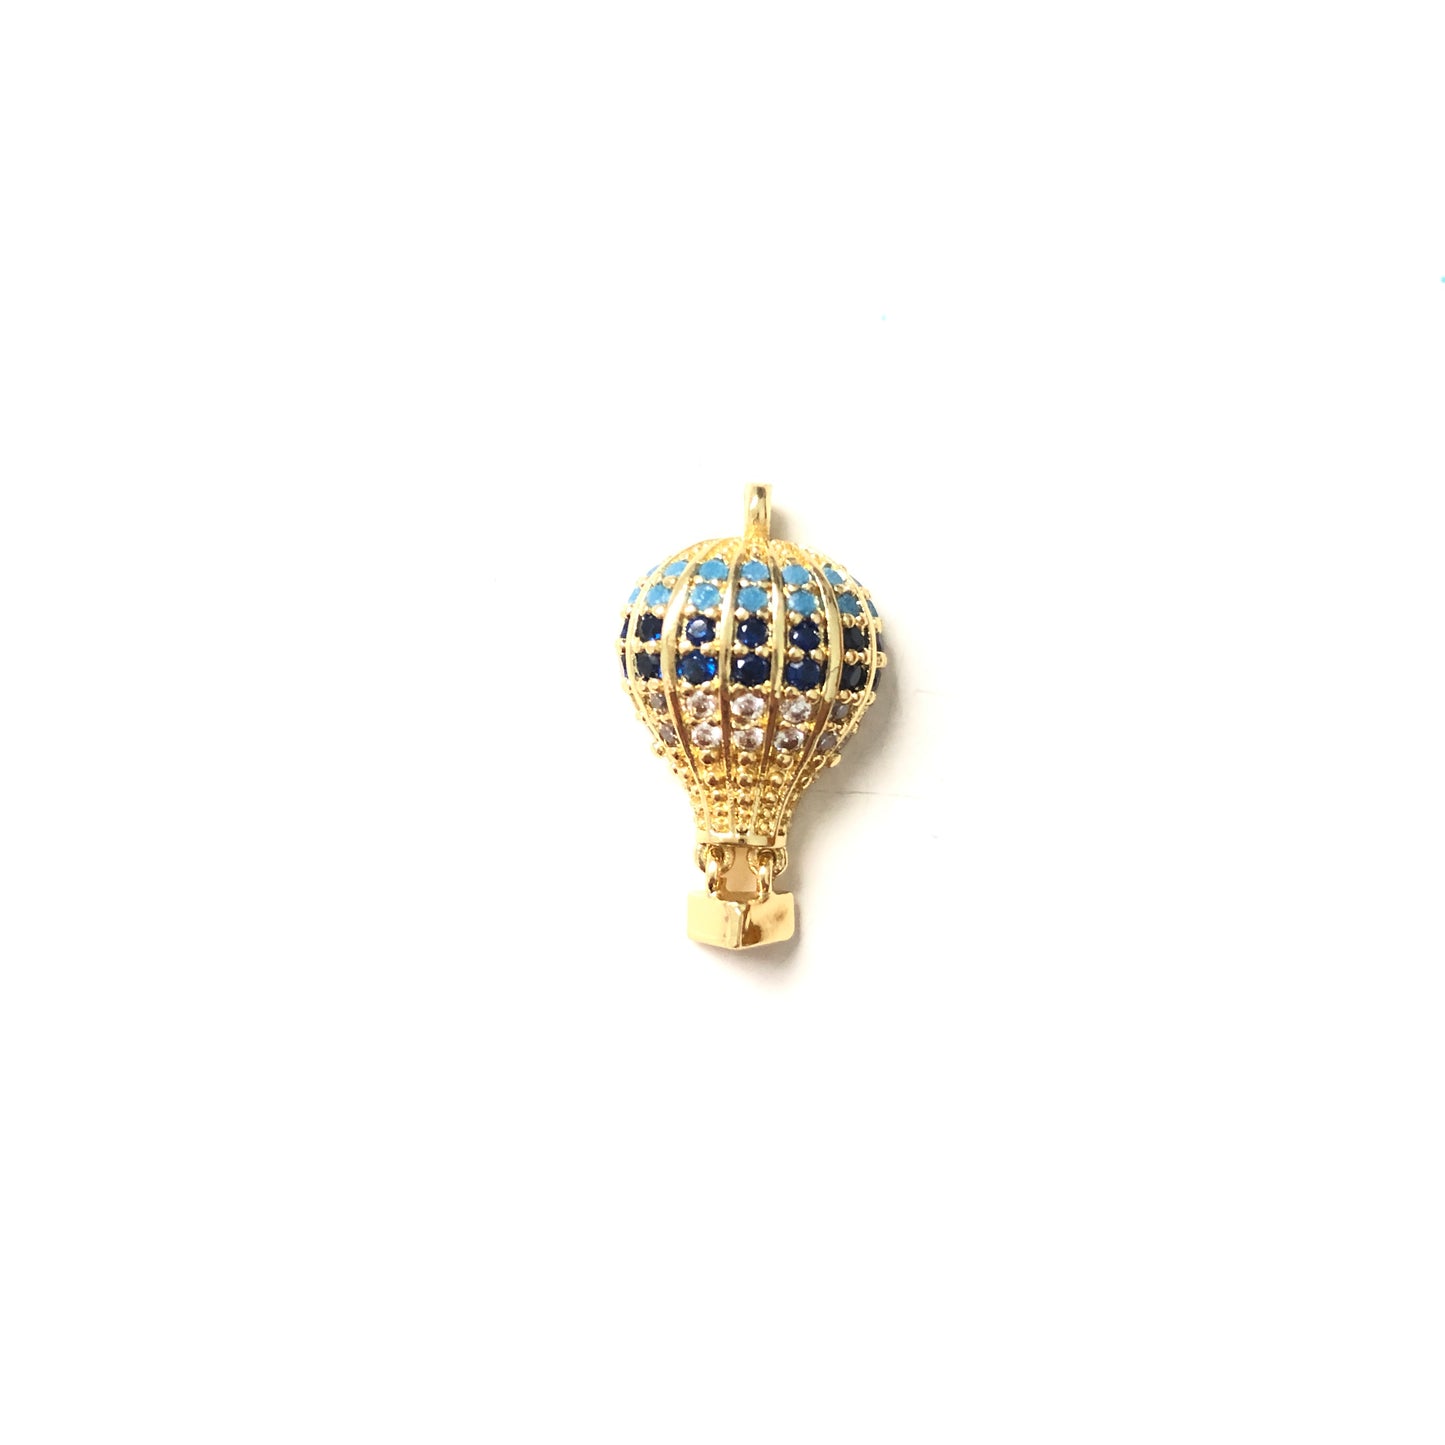 10pcs/lot 23*13mm CZ Paved Hot Air Ballon Charms Blue-Gold CZ Paved Charms Colorful Zirconia Charms Beads Beyond